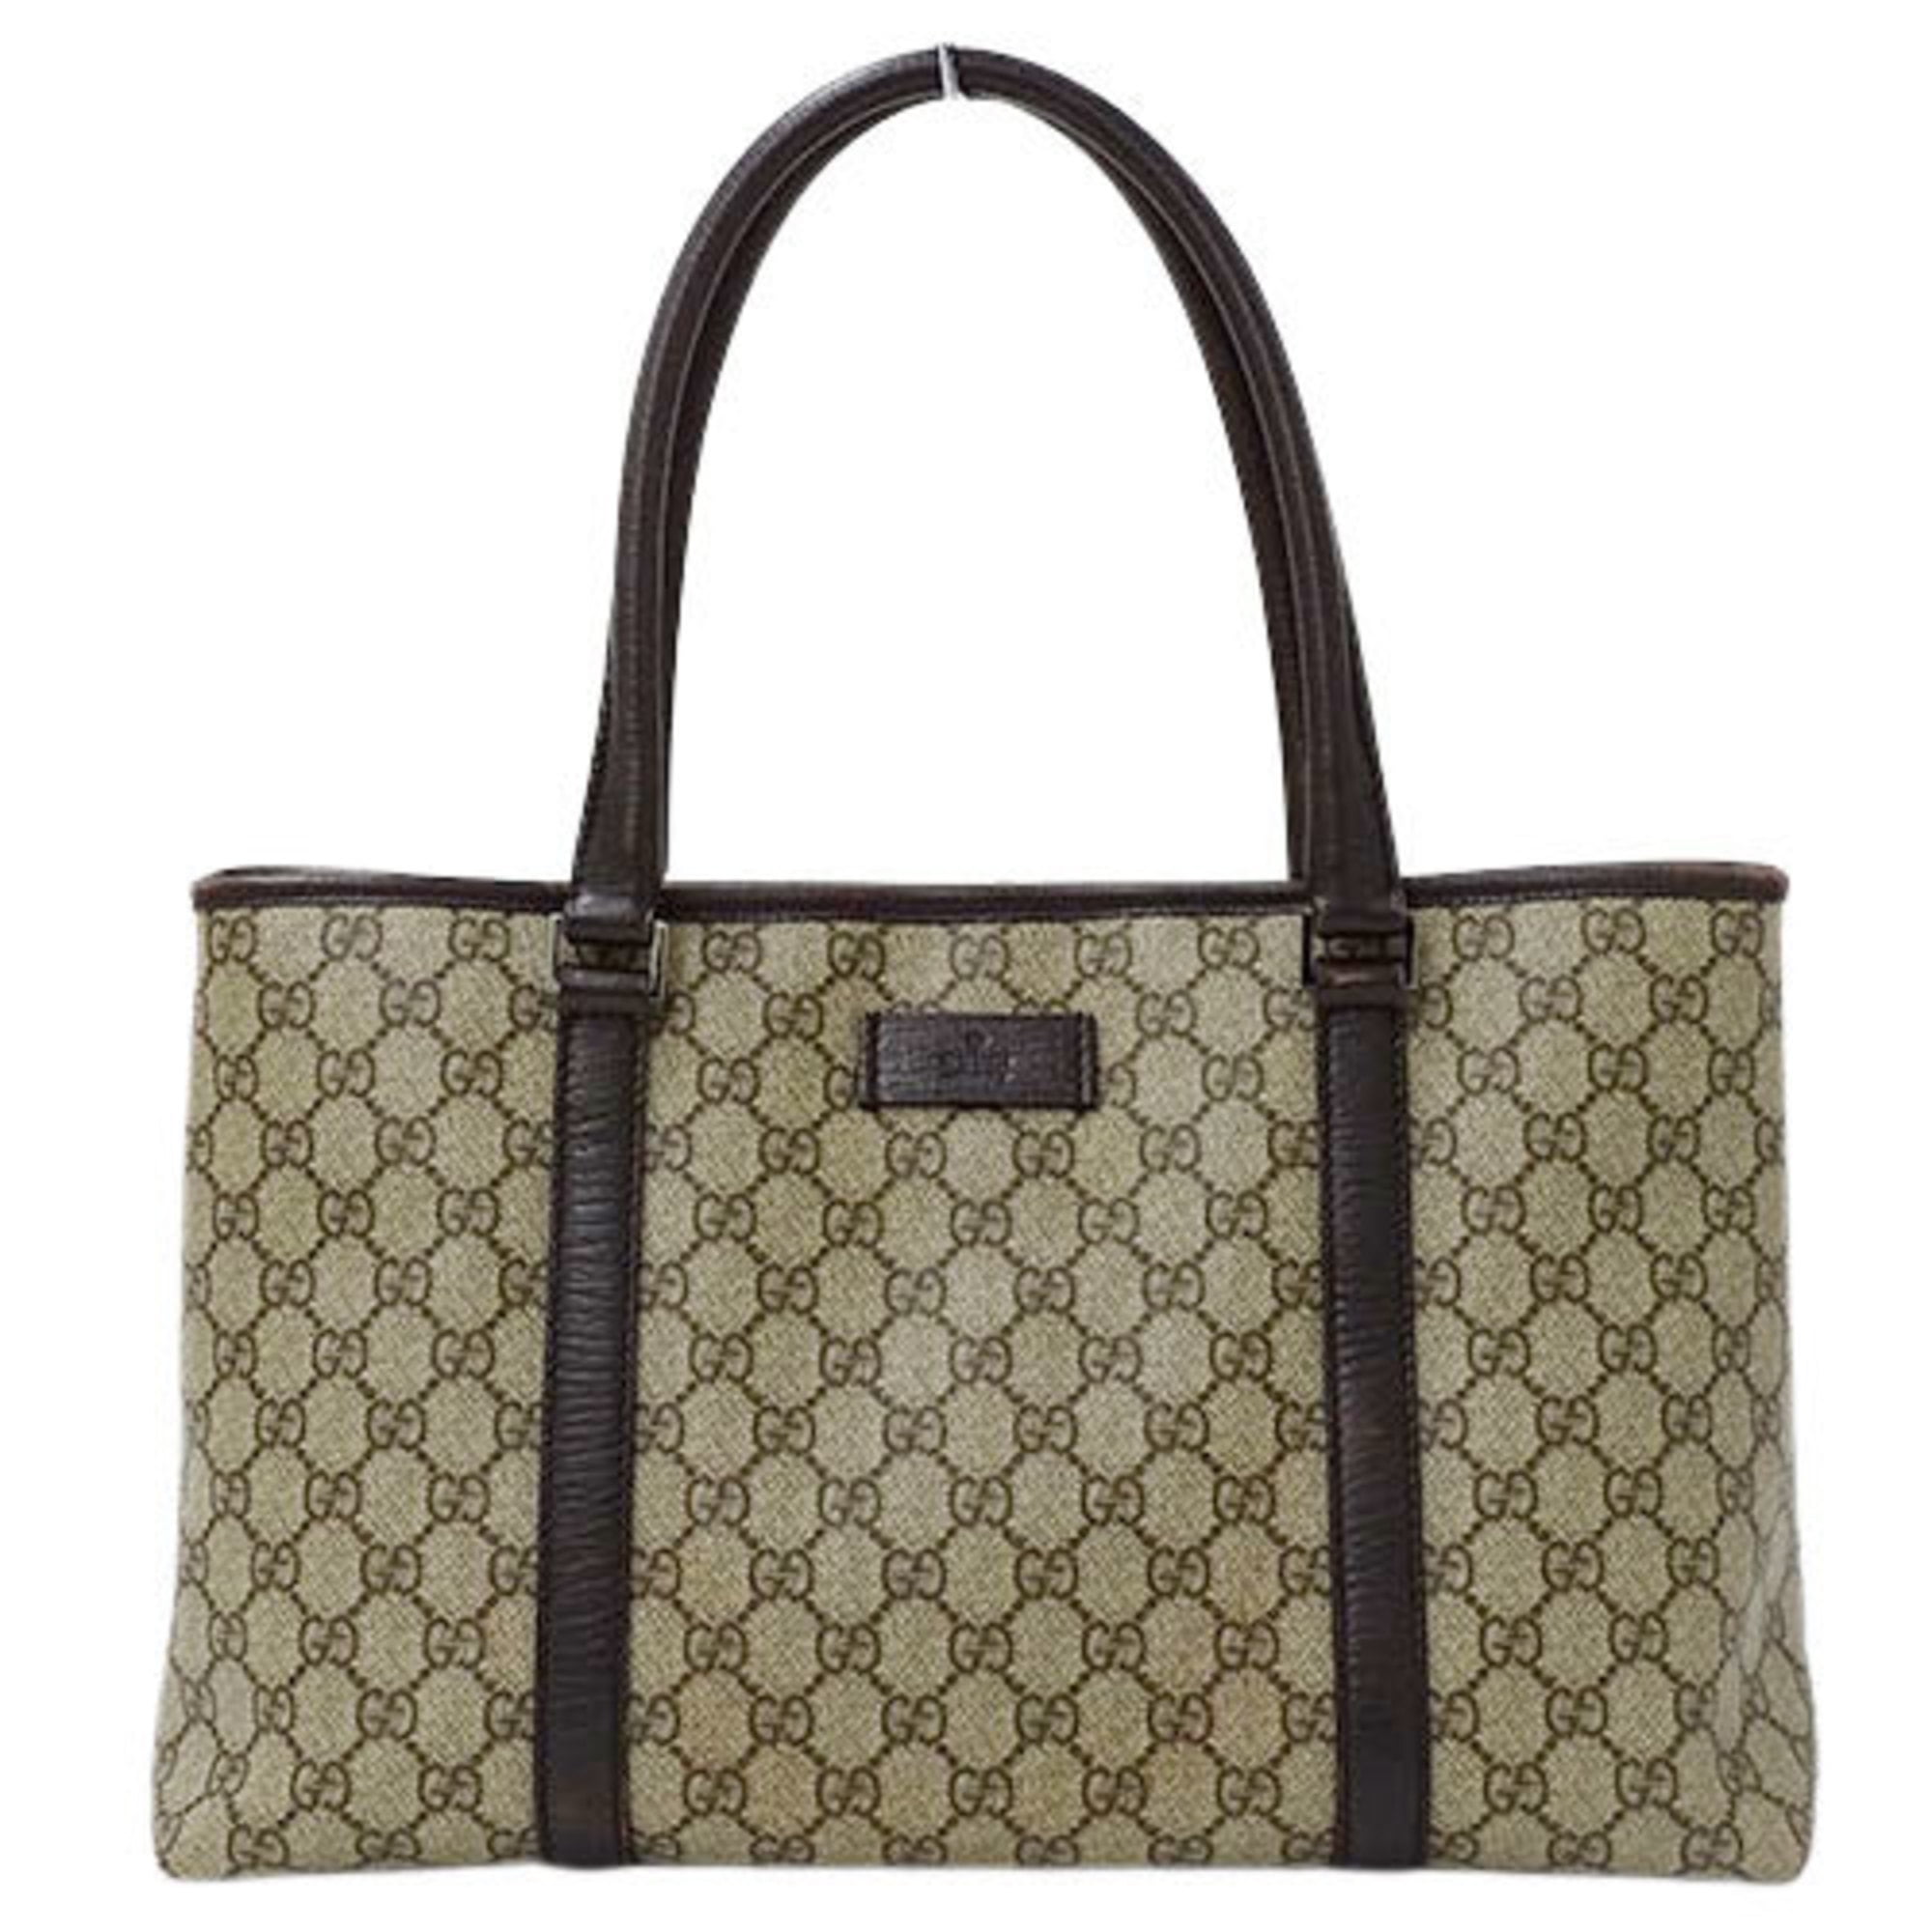 Authenticated Used Gucci GUCCI Women's Tote Bag Shoulder GG Supreme ...